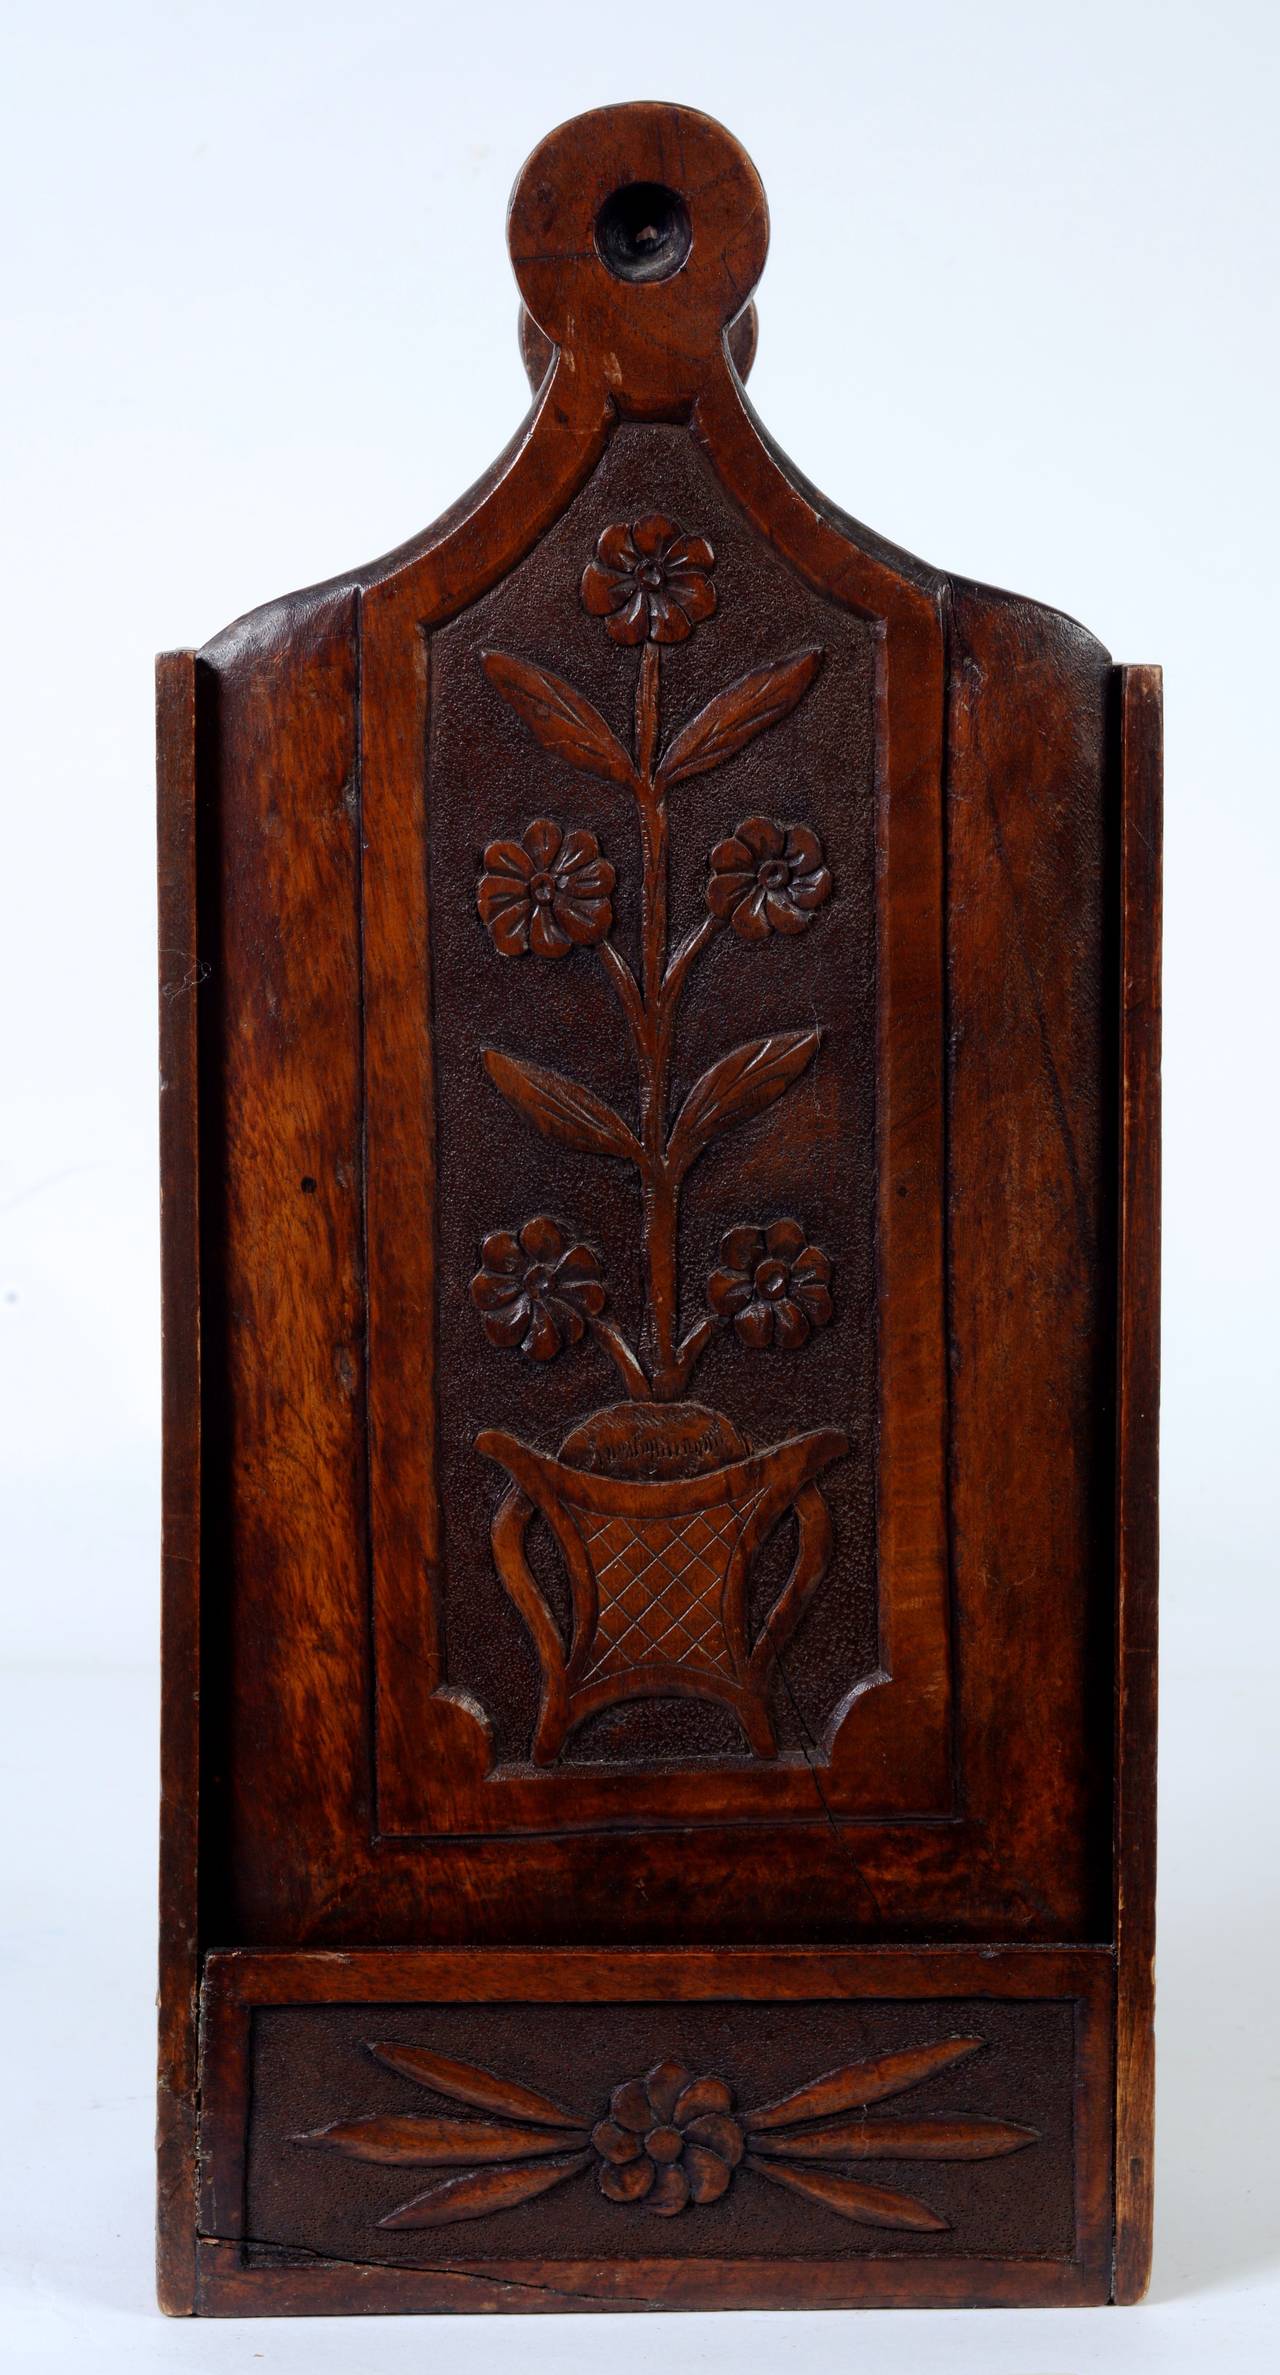 This beautiful French candle box is made of hand-carved walnut. The removable front panel is carved with stylized flowers in a double handled flower pot within a stippled background.
N.P. Trent has been a respected name in antiques for over 30 years